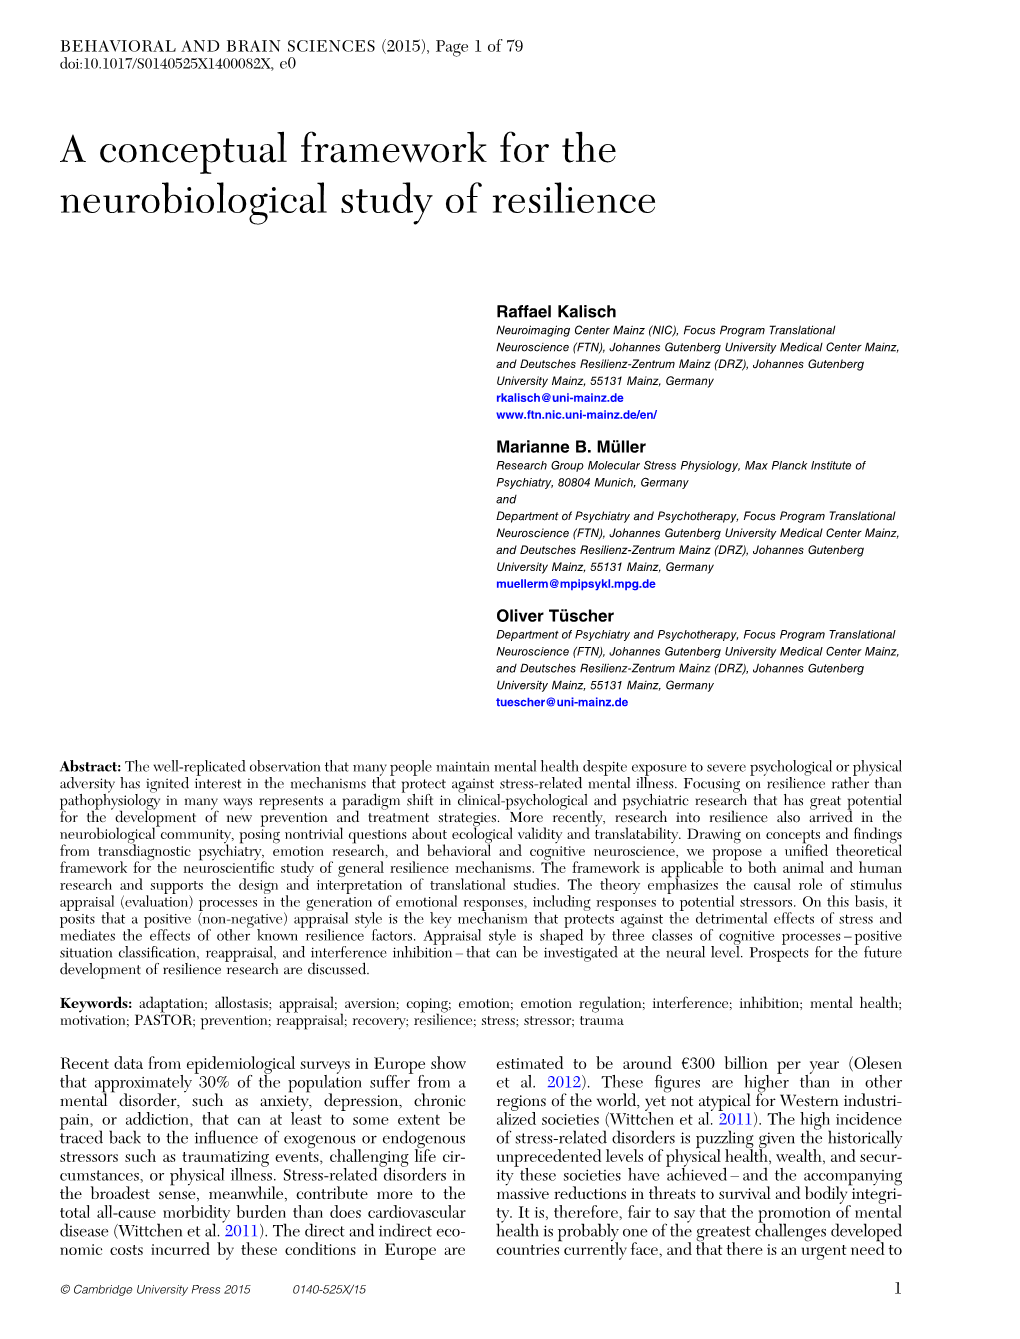 A Conceptual Framework for the Neurobiological Study of Resilience